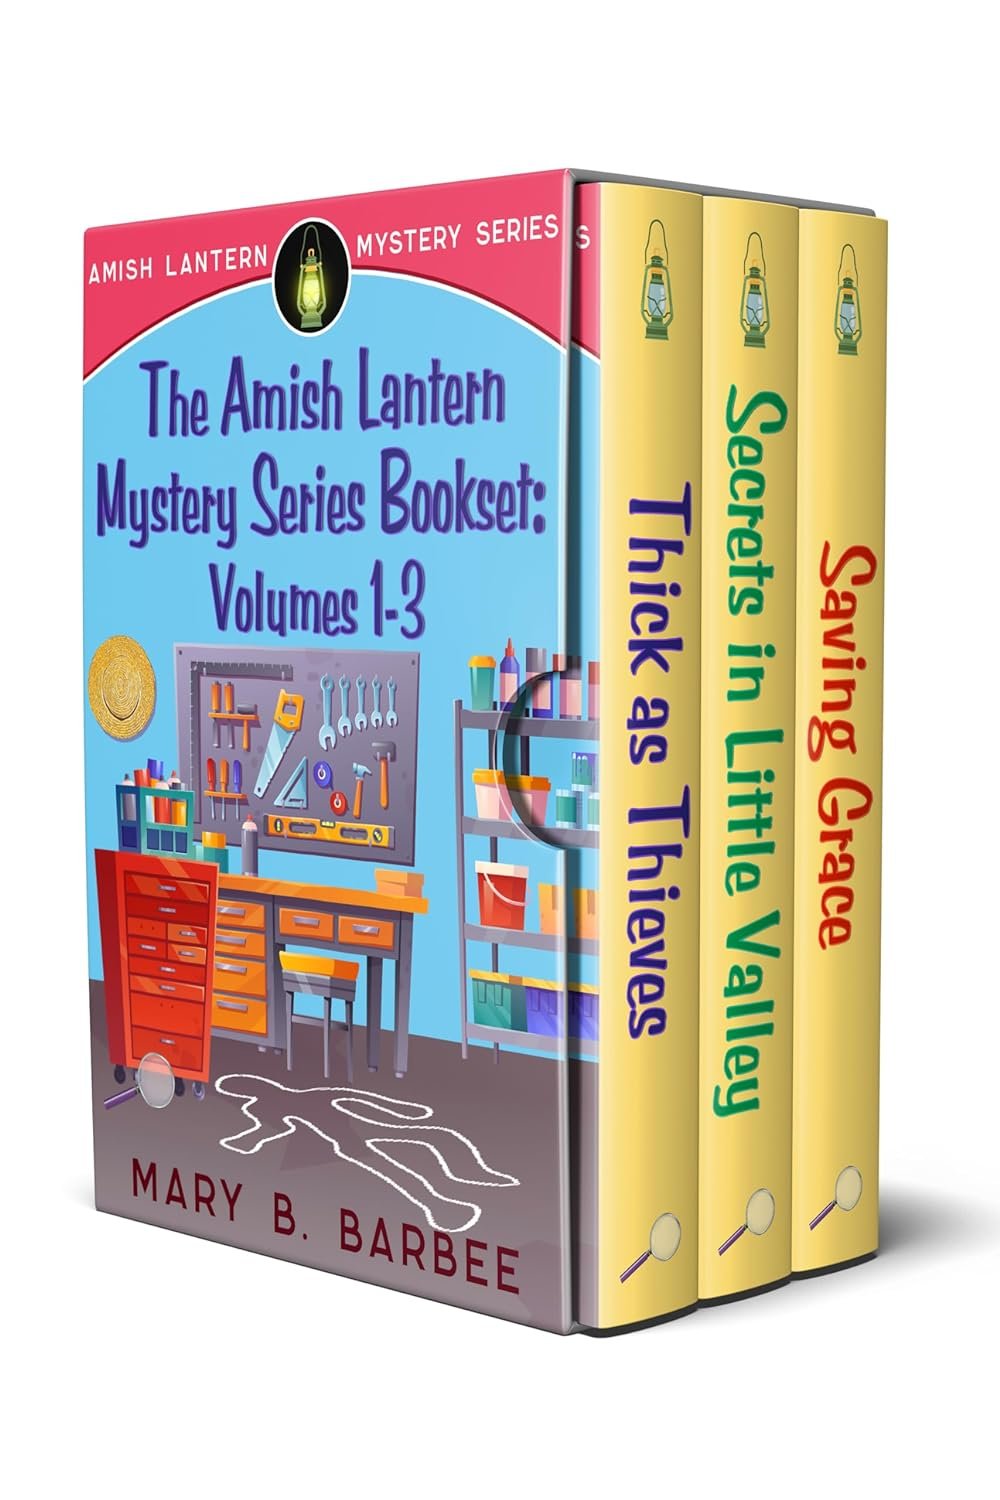 Cozy Mystery Boxed Set